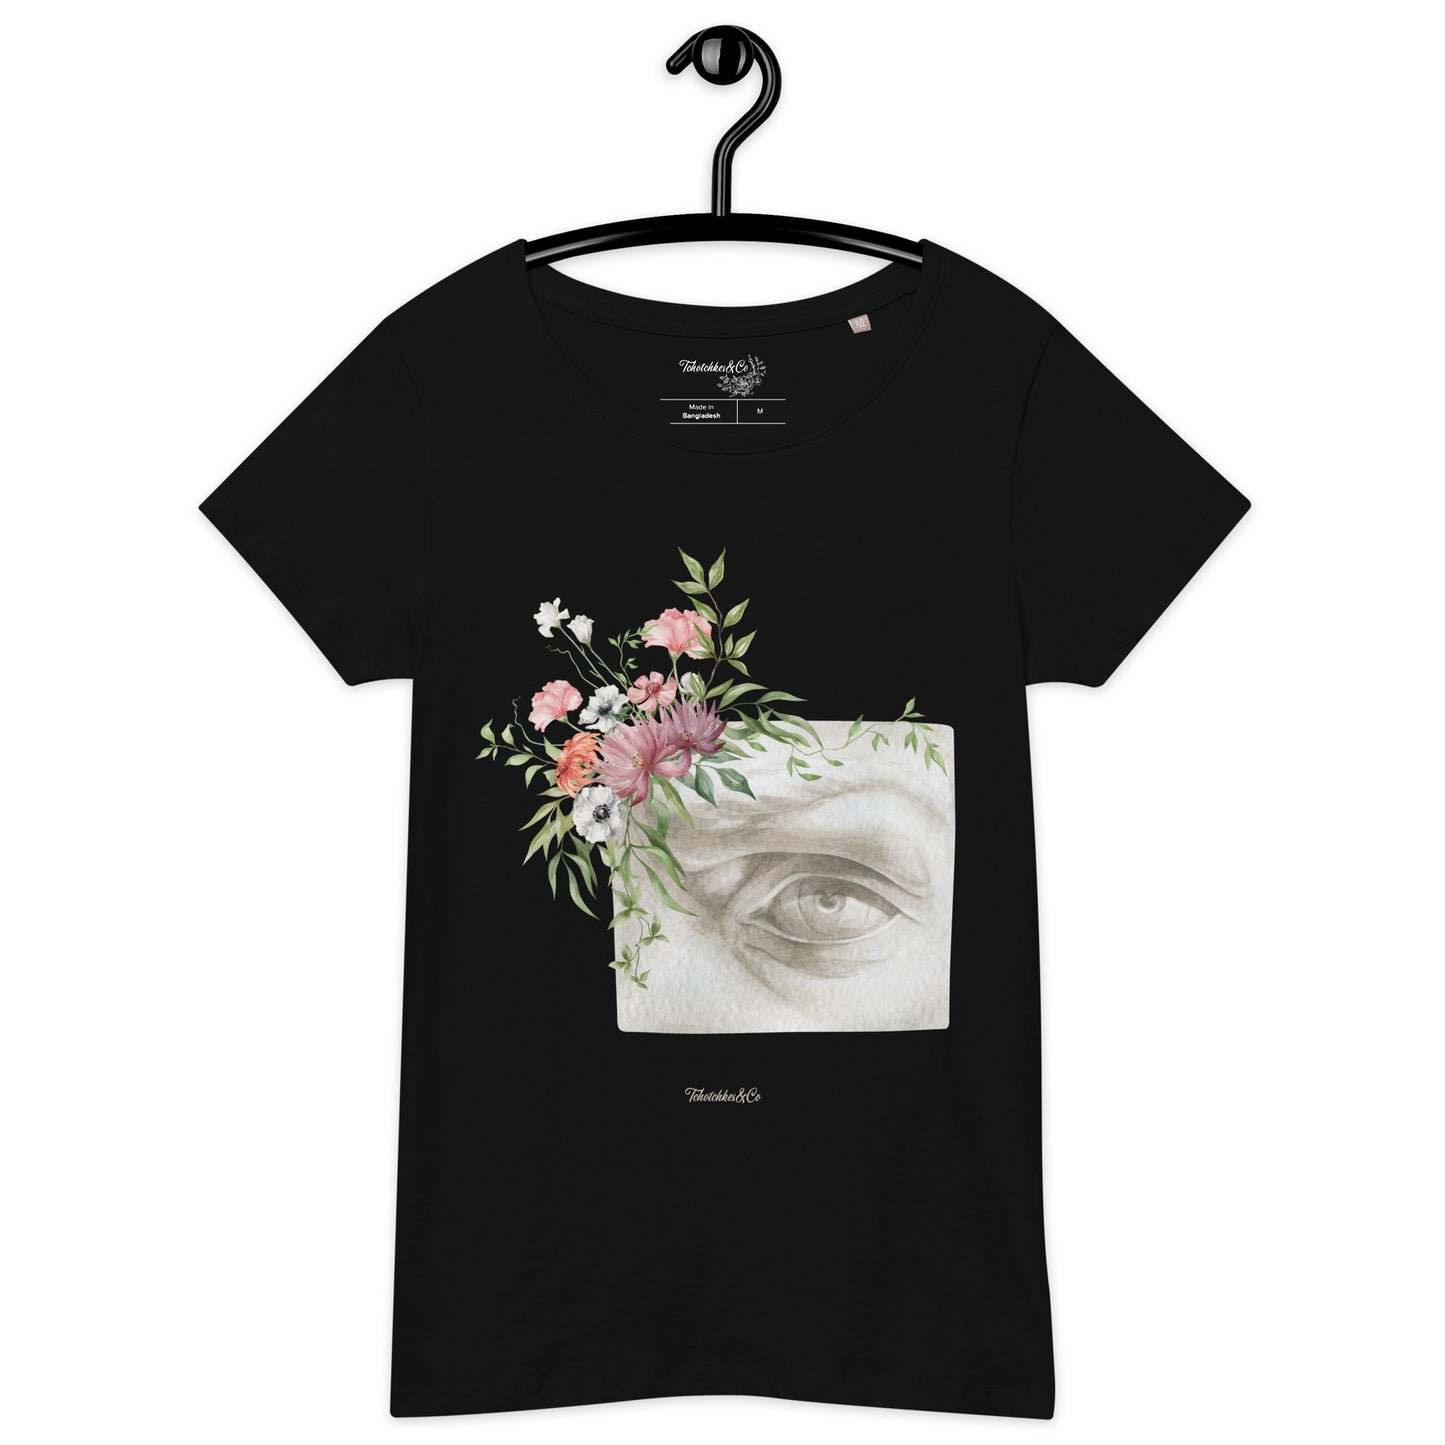 Neoclassical Floral Dark Academia Aesthetic Women's Cotton T-Shirt